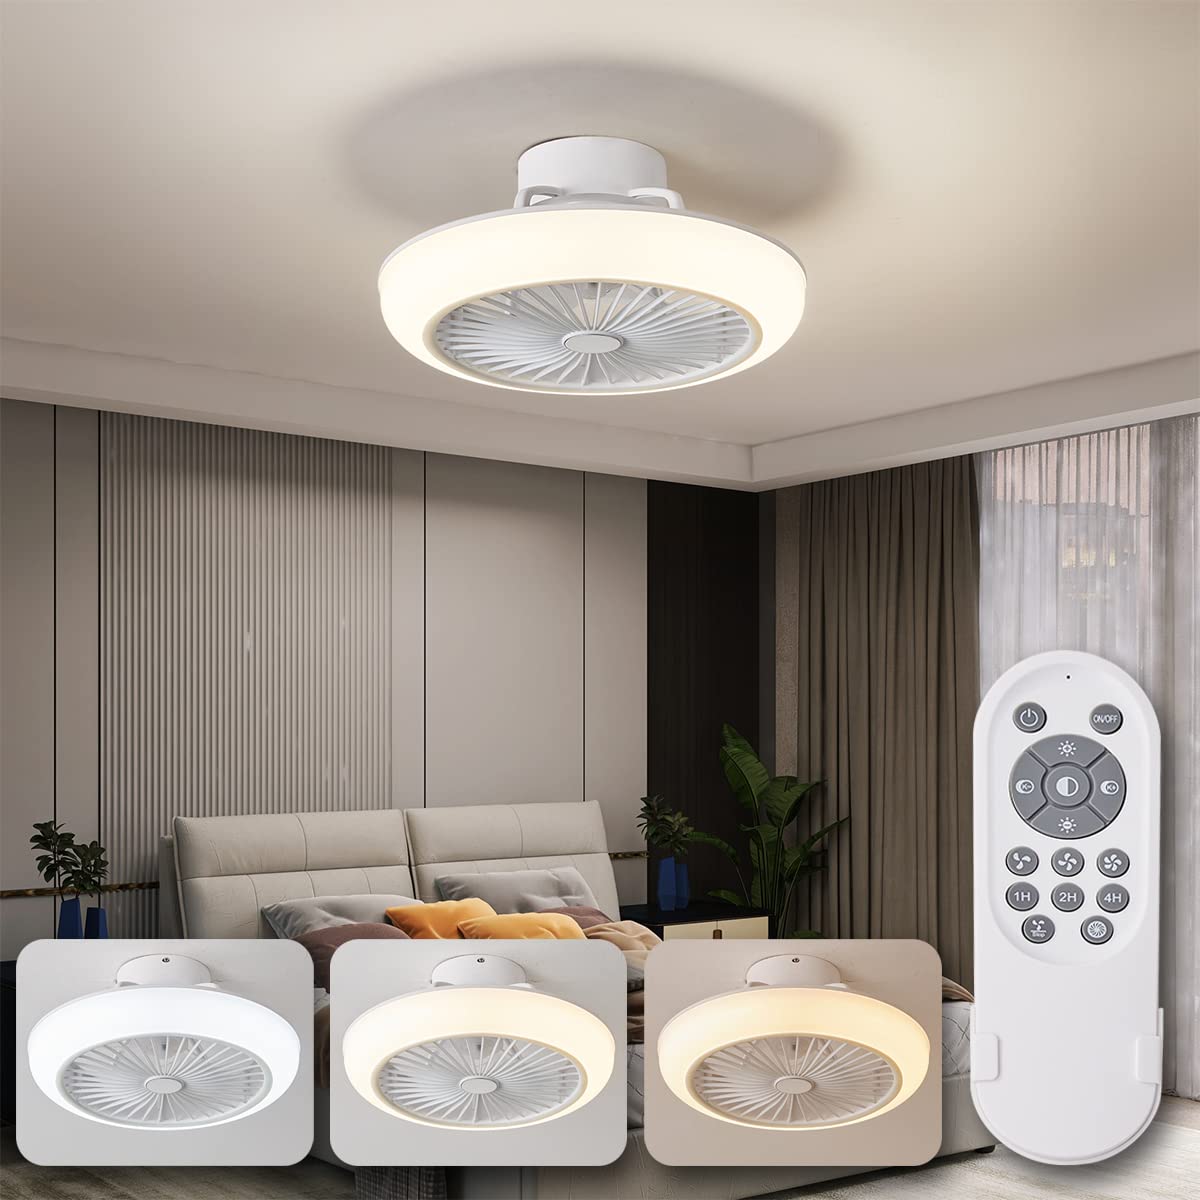 LHLYCLX Modern 18 ceiling Fans with Lights Flush Mount, 3 color Dimmable LED ceiling Fan Remote control, Low Profile Enclosed ceiling Fa